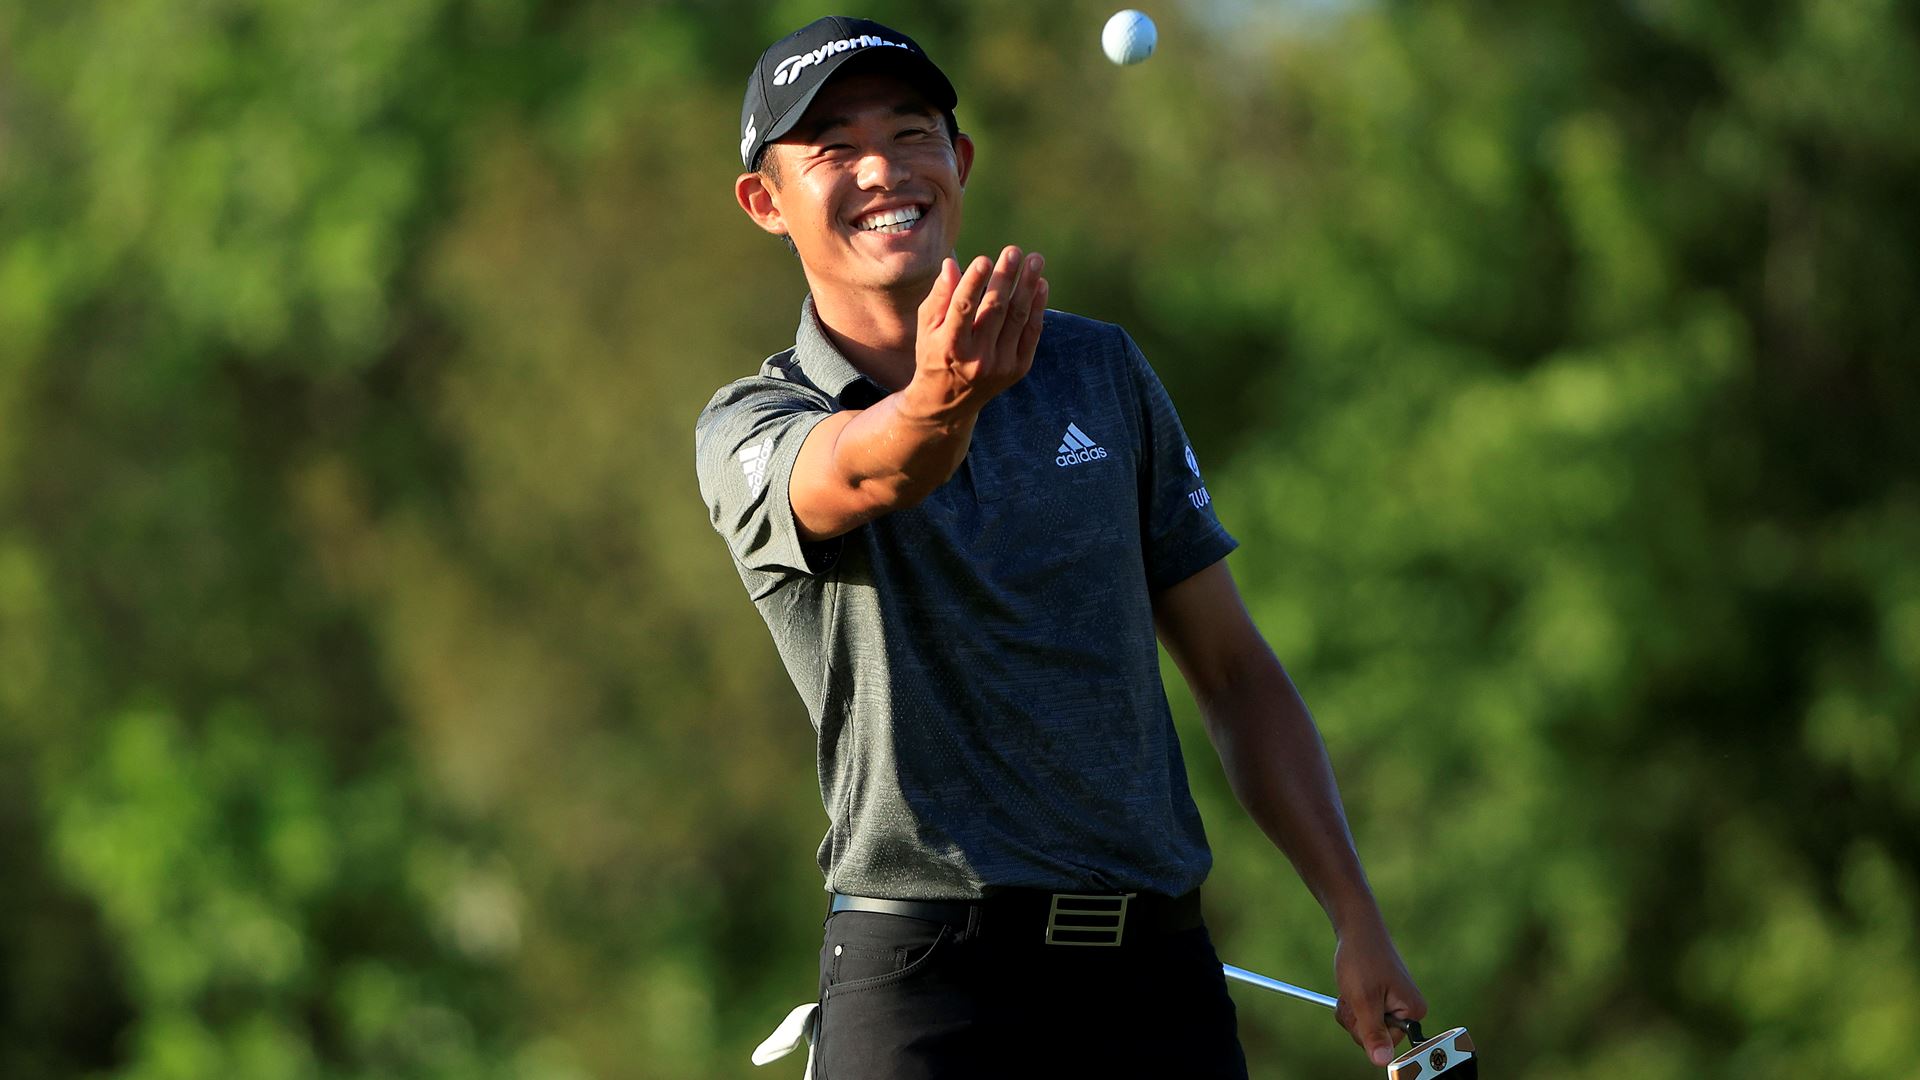 Collin Morikawa Collects His First World Golf Championship Playing TaylorMade's New TP5 Golf Ball